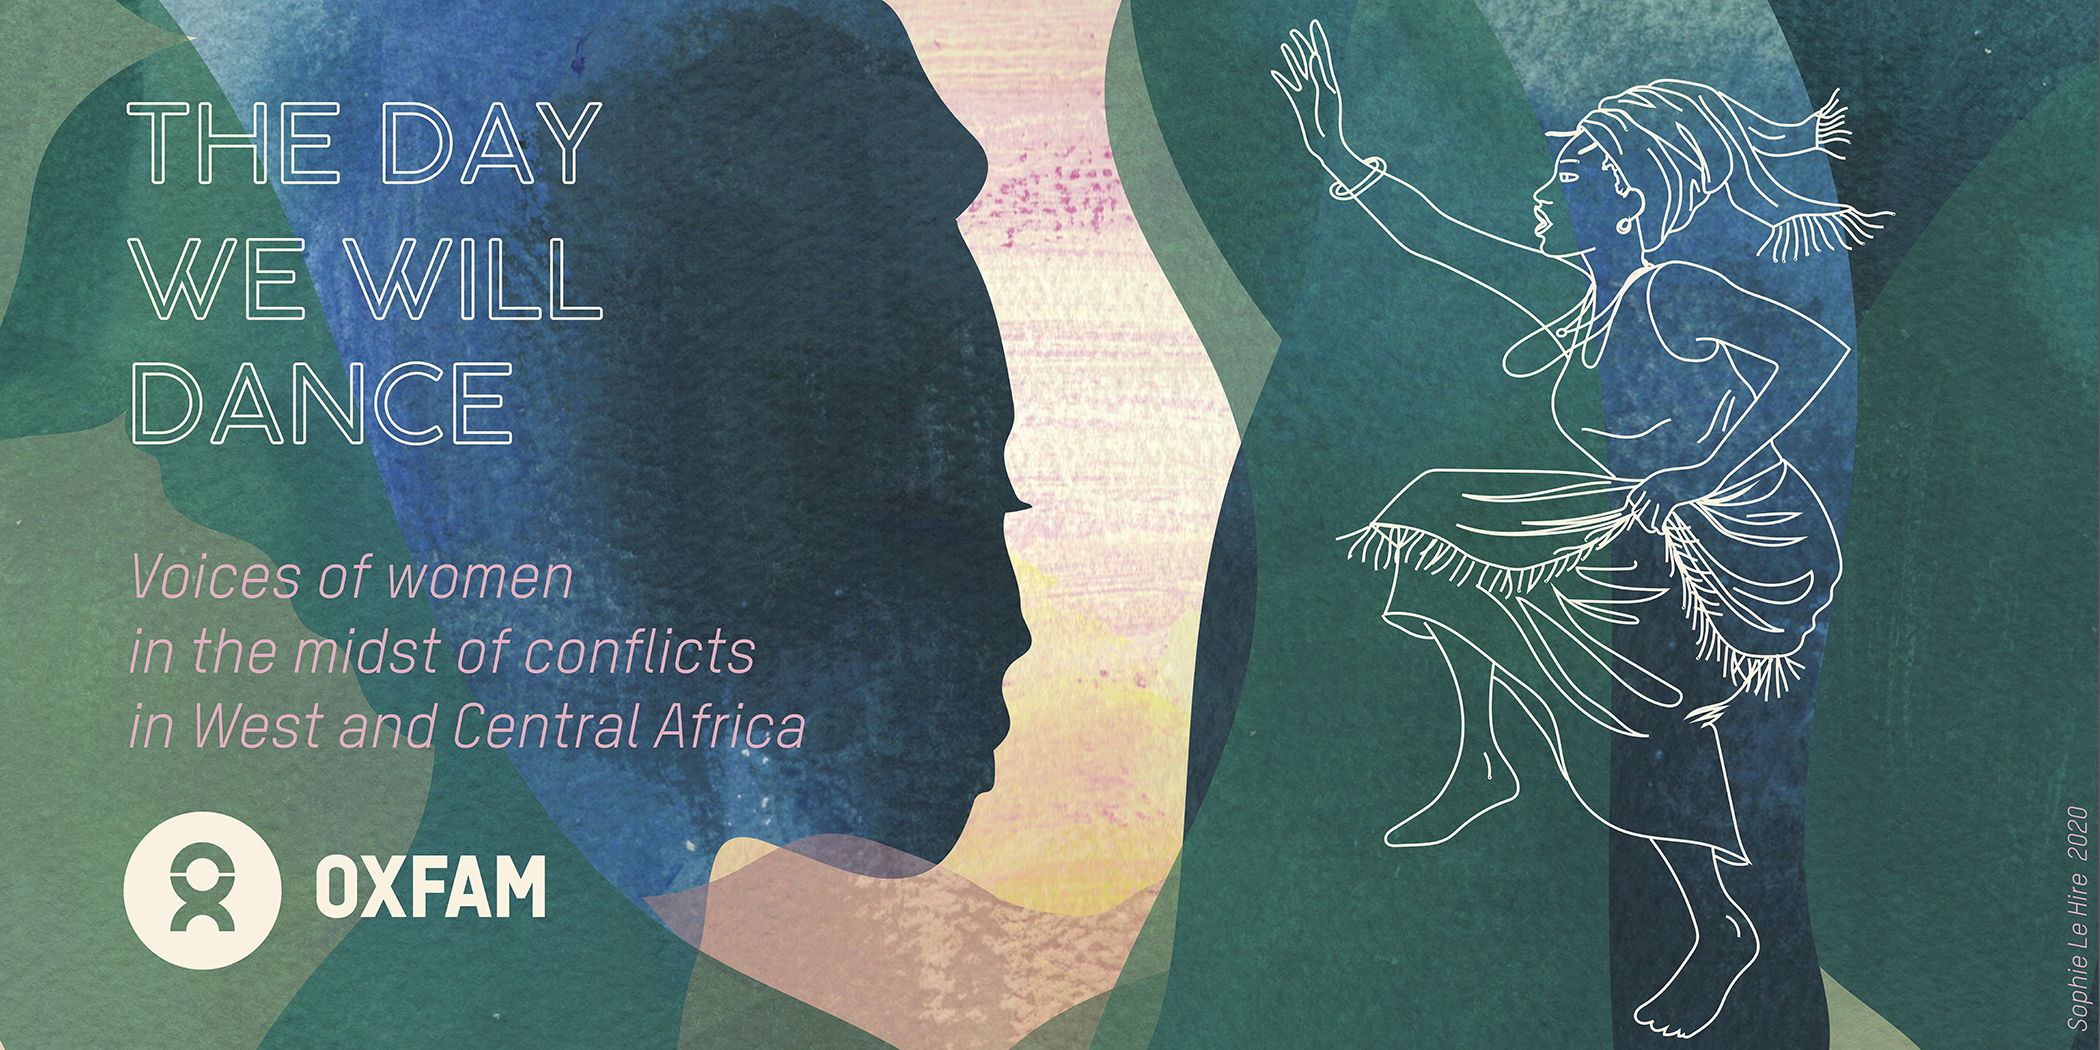 “The day we will dance”: Voices of women in the midst of conflicts in West and Central Africa